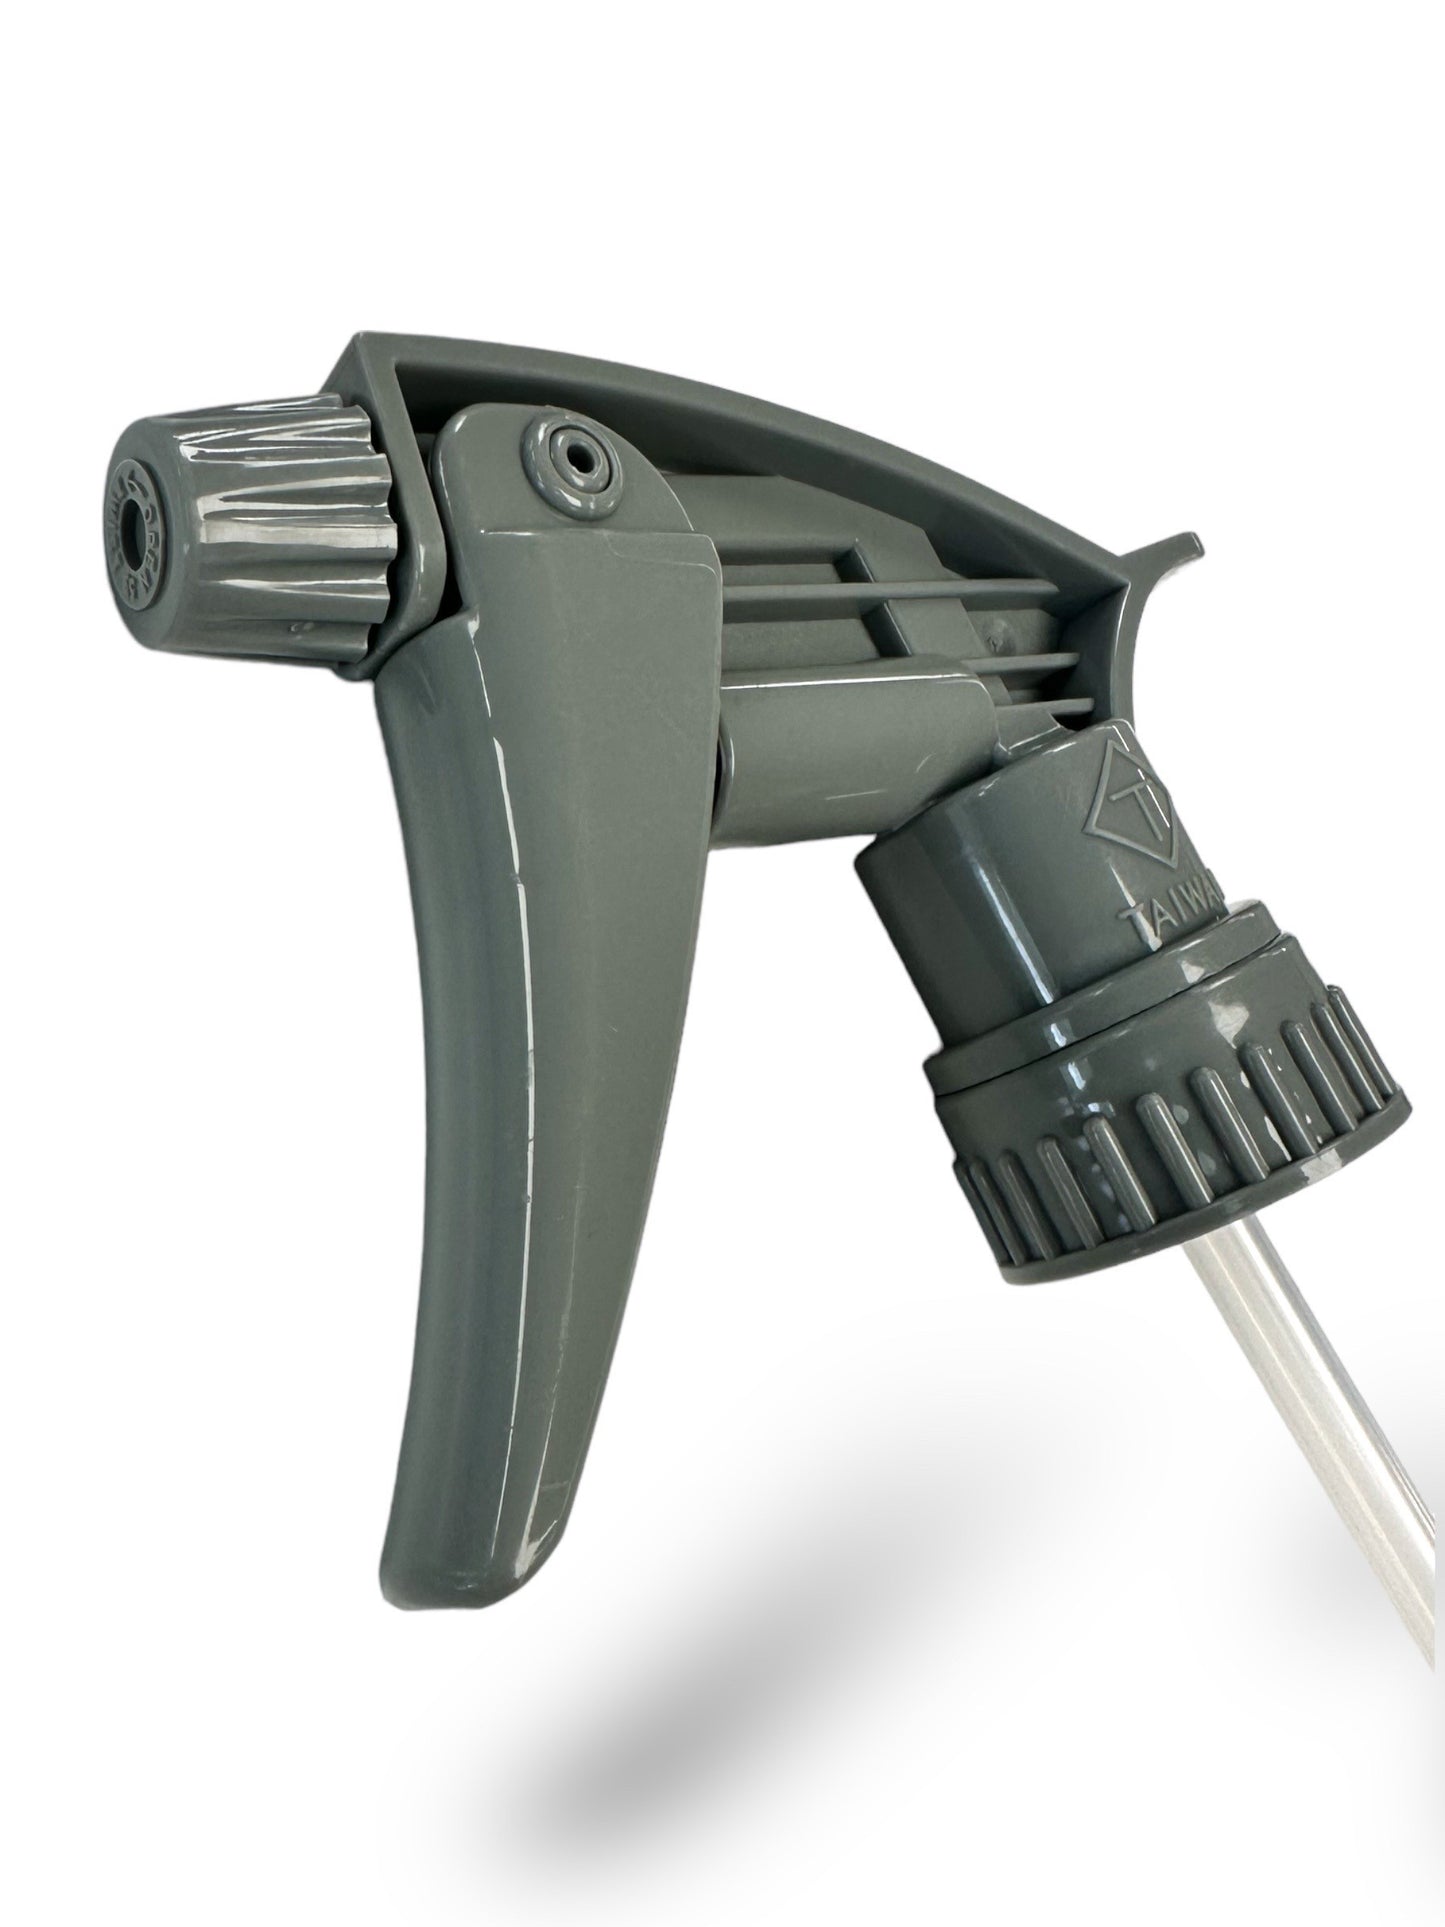 Gray Chemical Resitant Trigger SprayerChemical resistant to most commonly used detail products. Not suitable for acids, strong solvents or heavy caustic materials. Easy squeeze trigger allows for comfortable use while spraying product. Fits 28/410 bottle